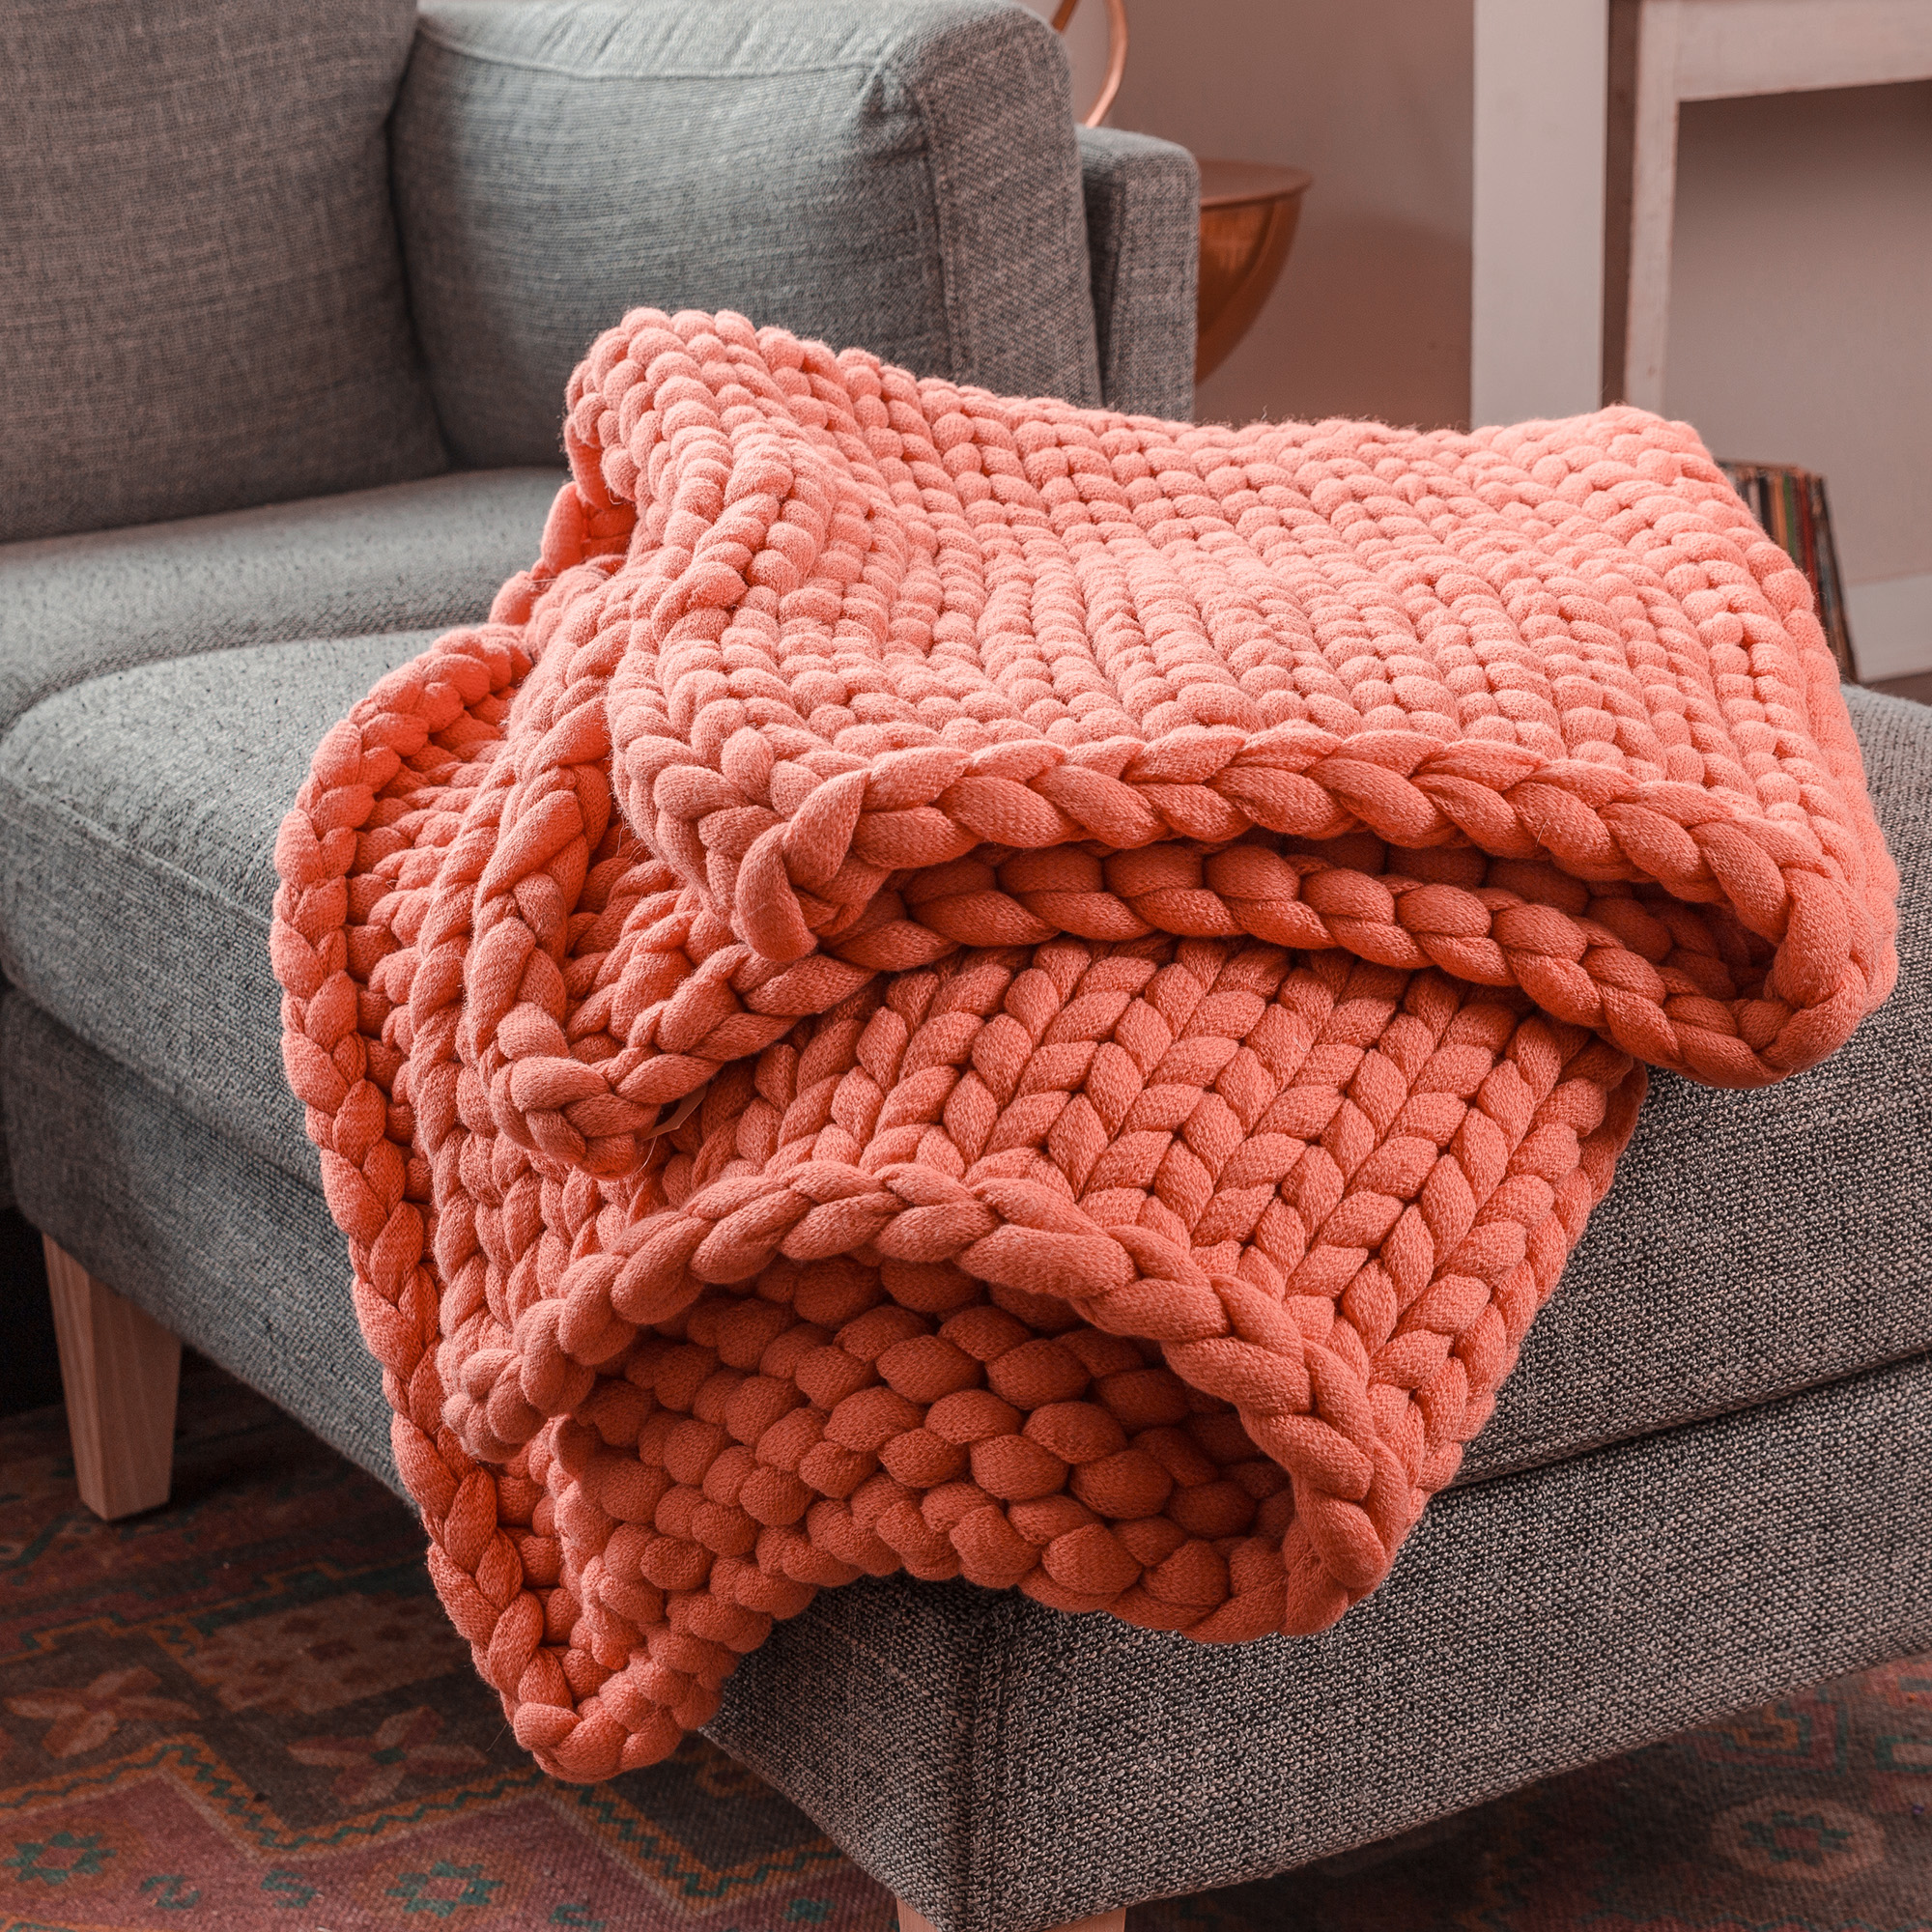 How to make a chunky knit blanket - Gathered